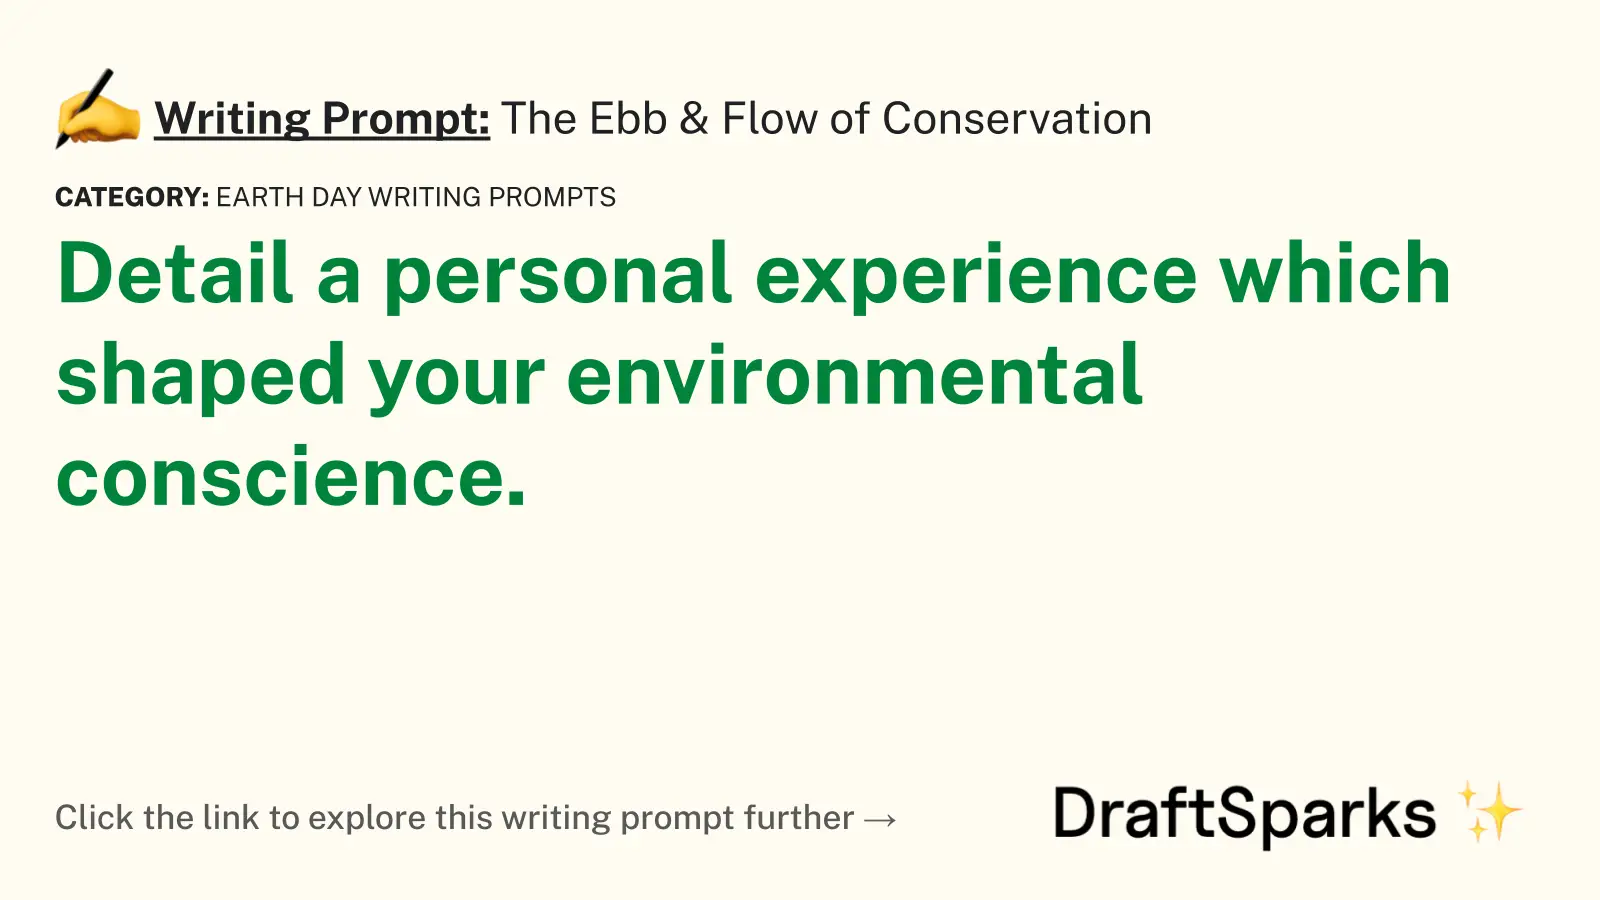 The Ebb & Flow of Conservation